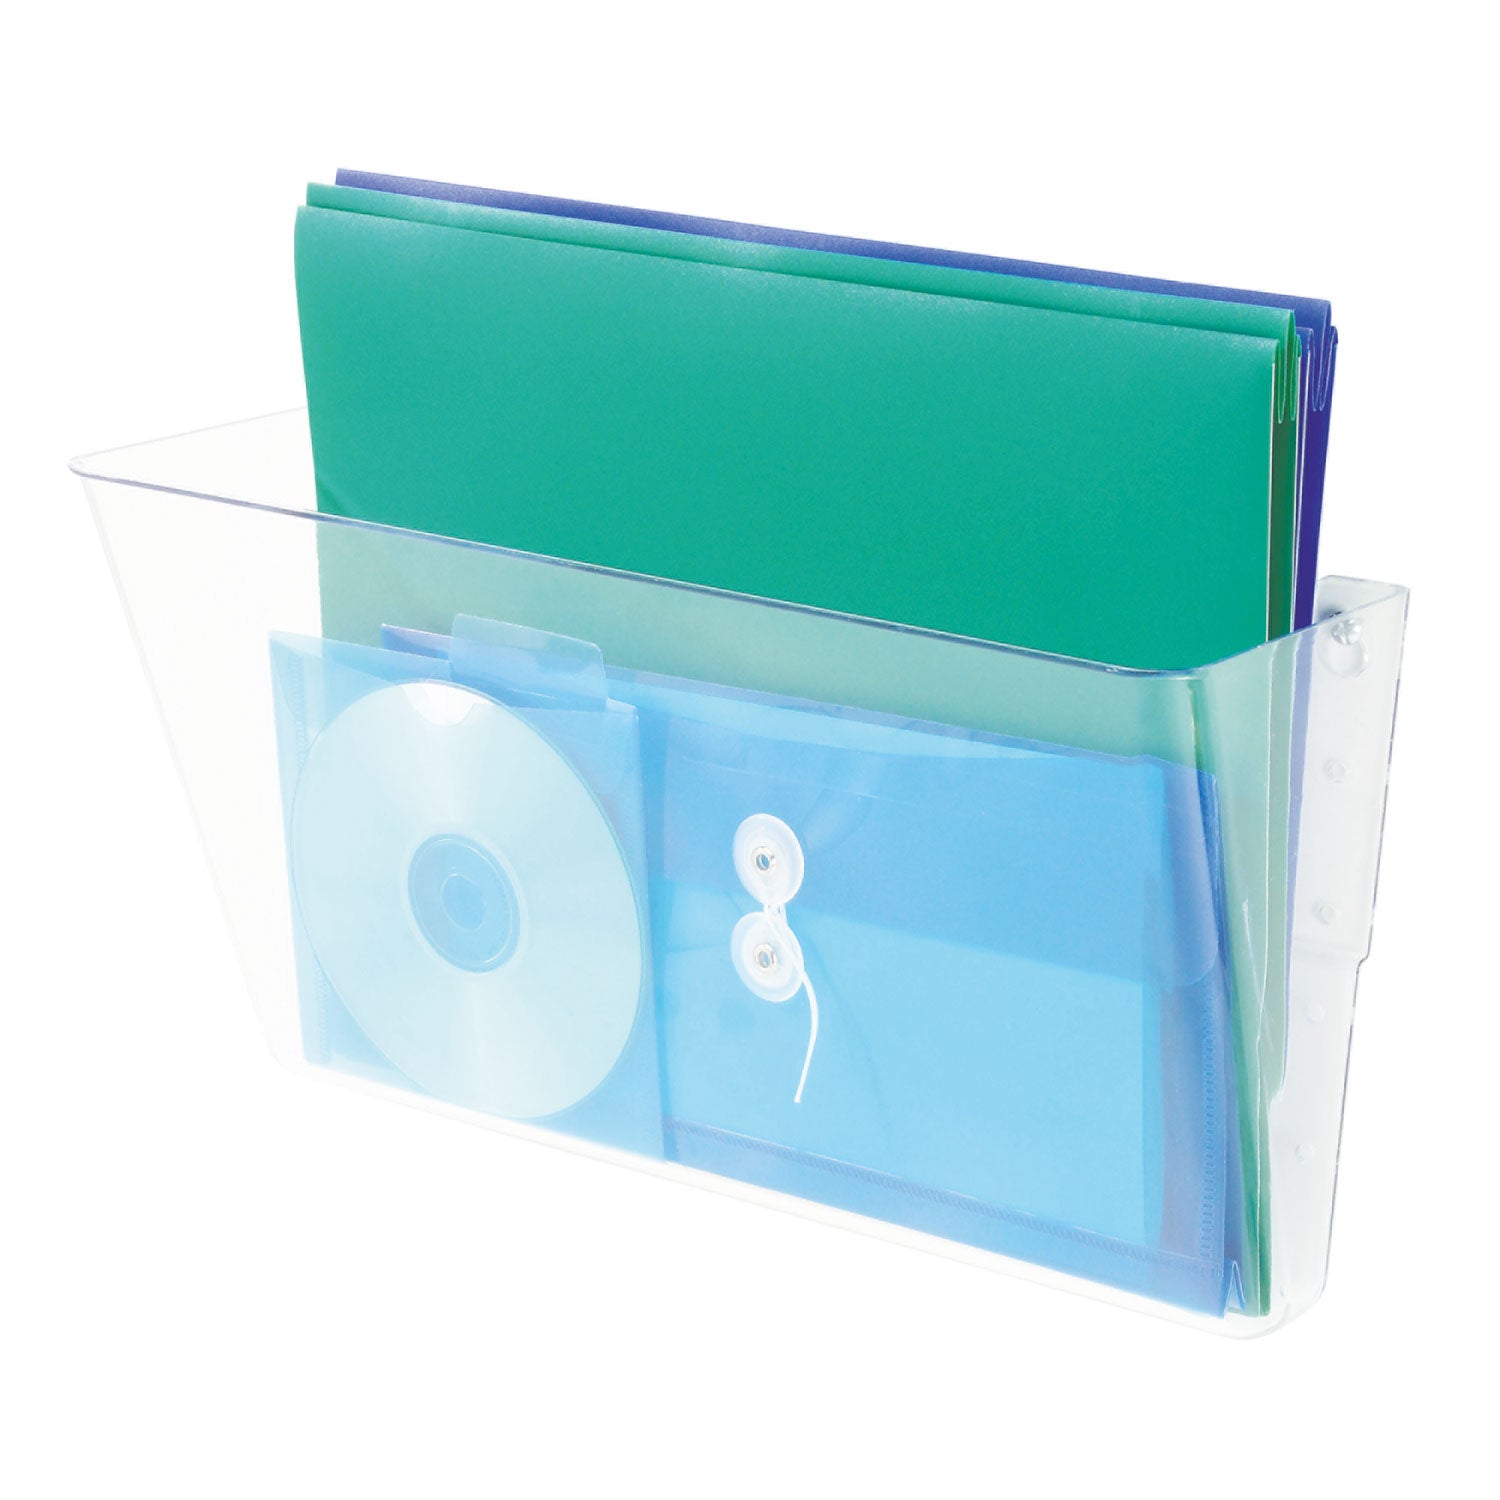 Stackable DocuPocket Wall File, Legal Size, 16.25" x 4" , Clear - 